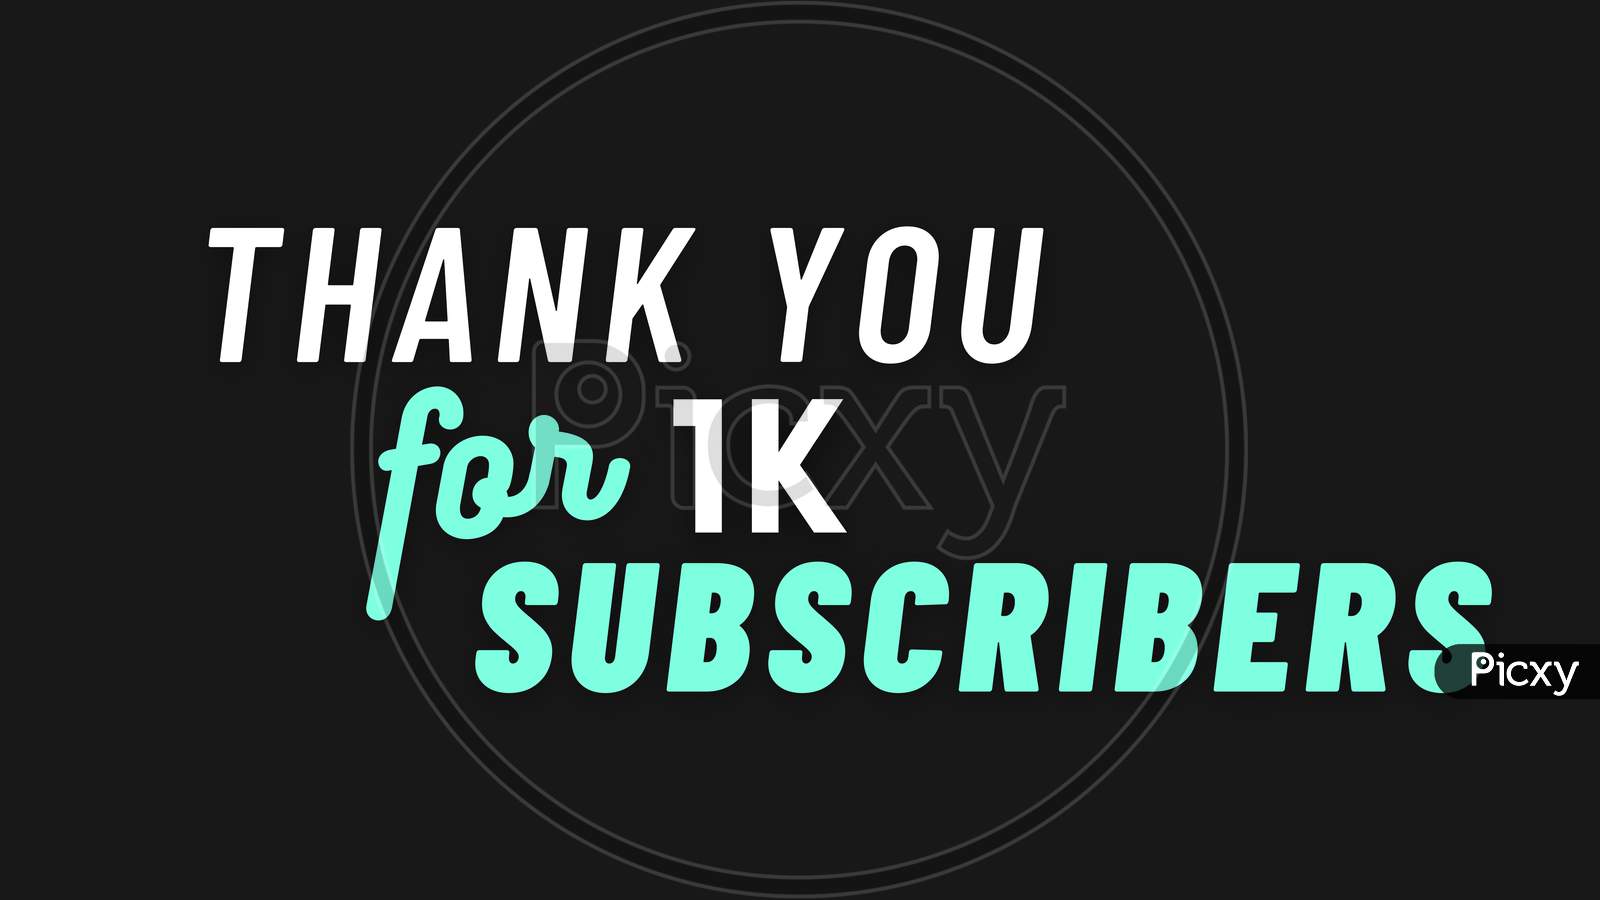 Thank you for 1k Subscribers Design